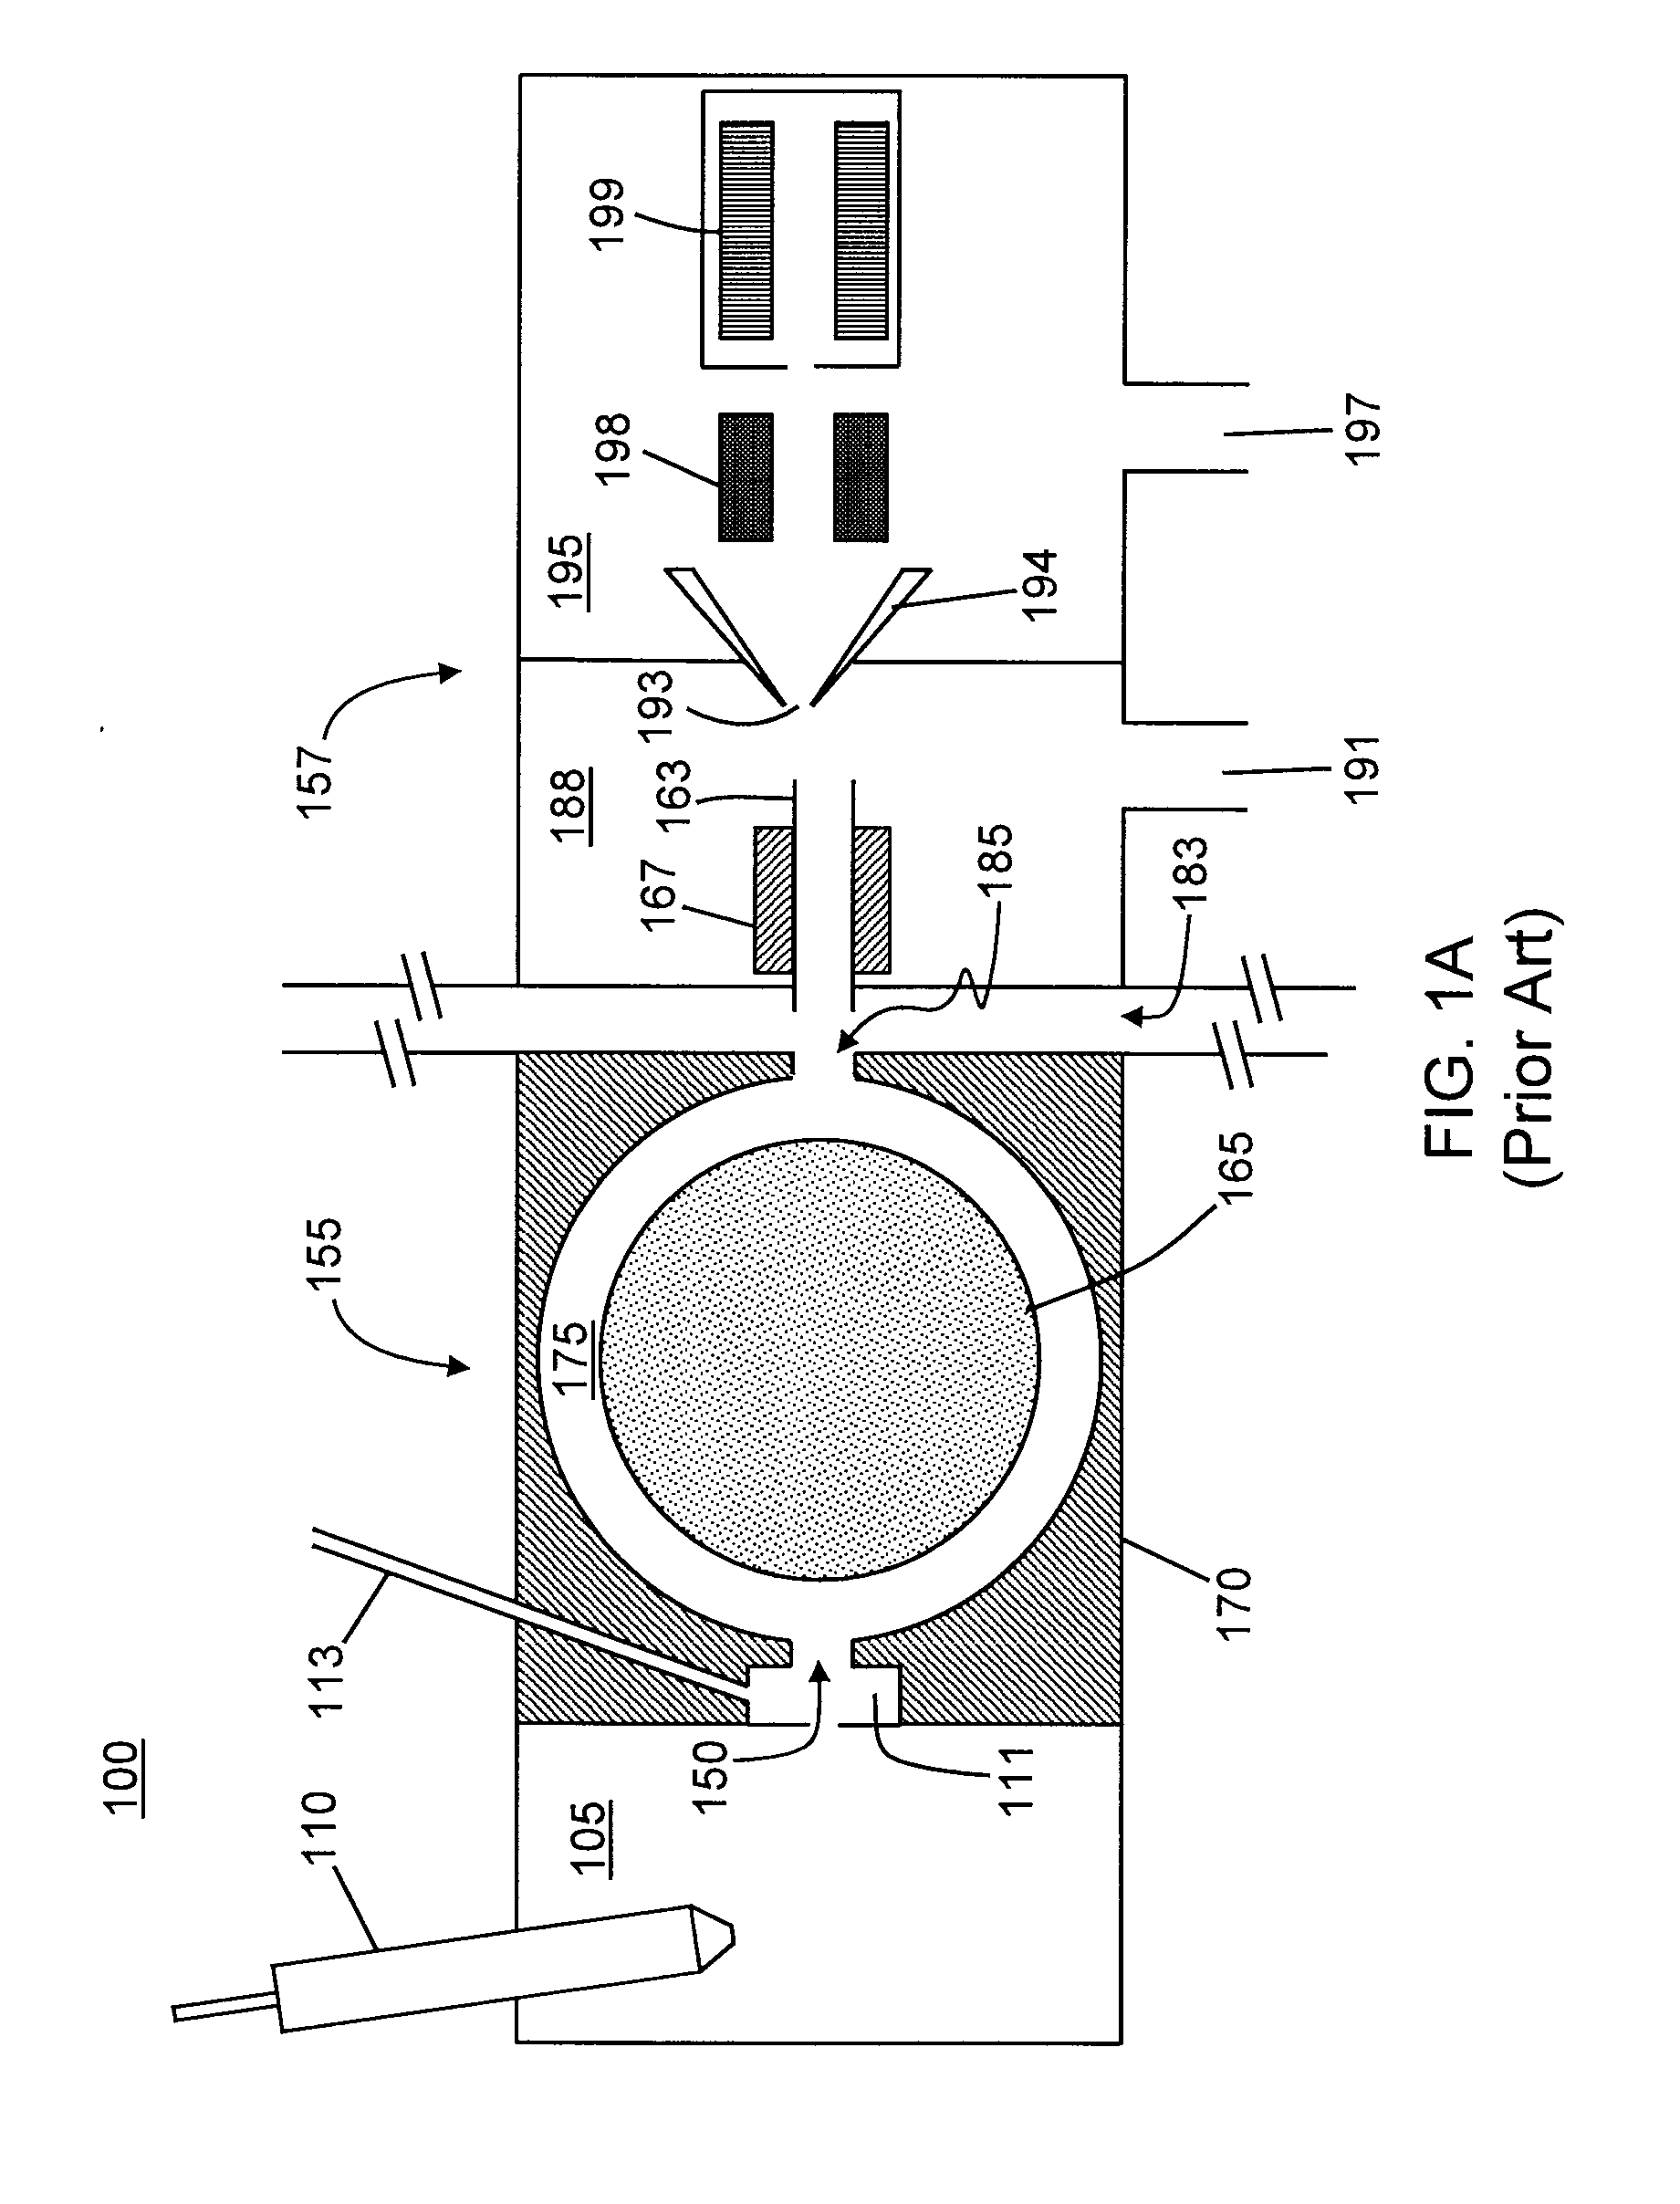 FAIMS Having a Displaceable Electrode for On/Off Operation